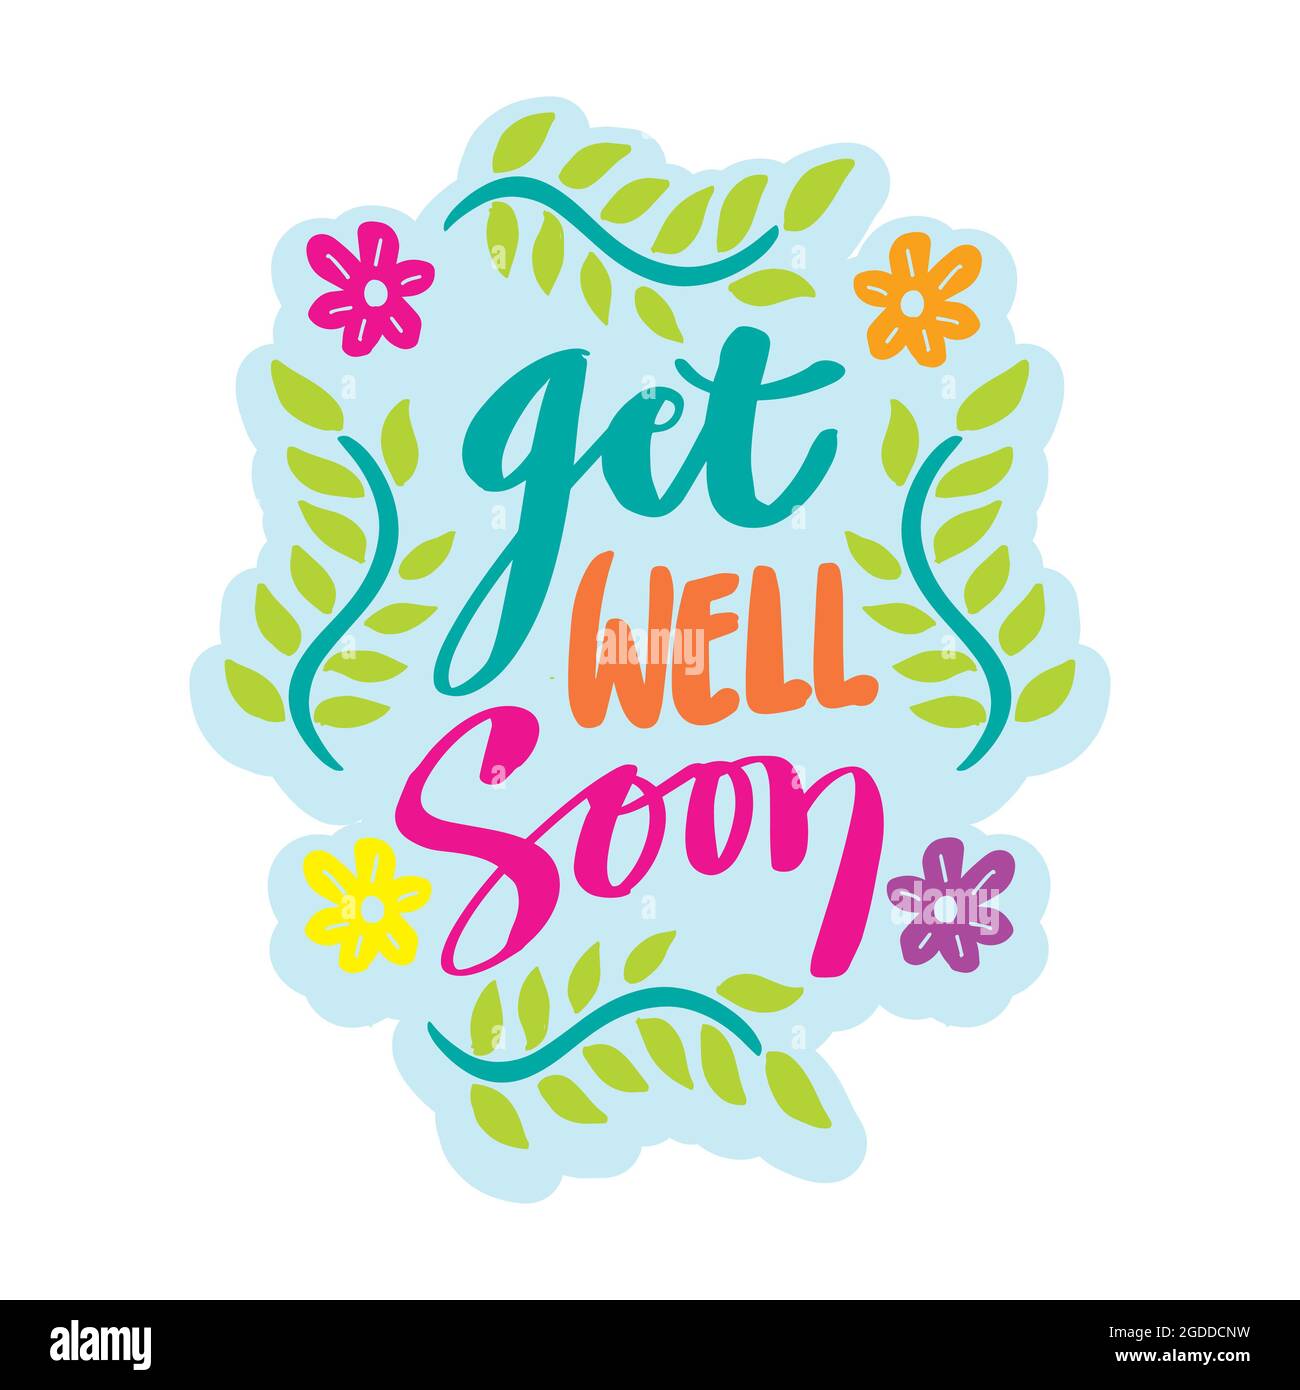 Free Vector  Get well soon quote and teddy bear